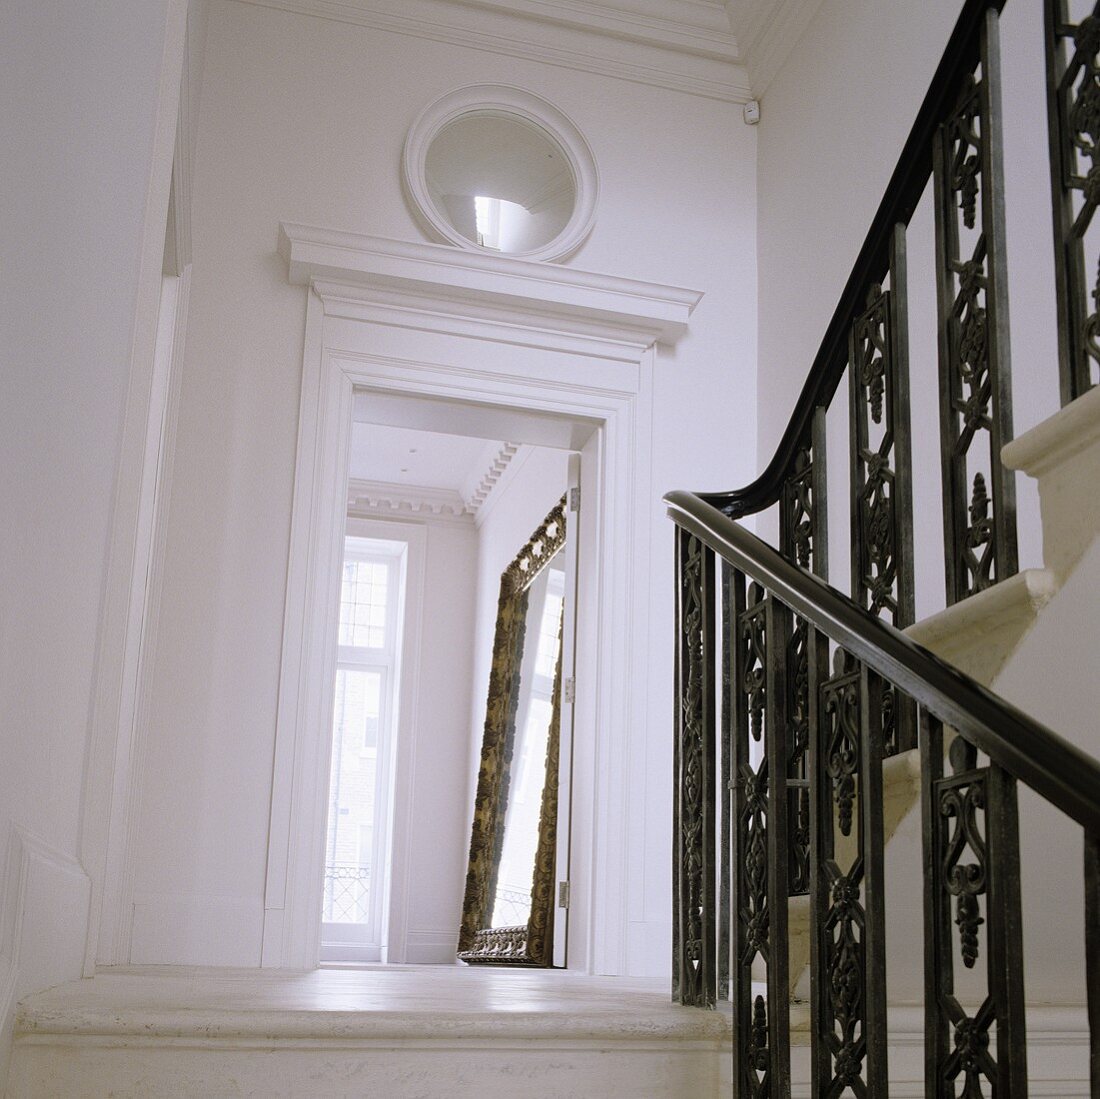 Staircase with black metal bannisters and door opening with a view of a full-length mirror